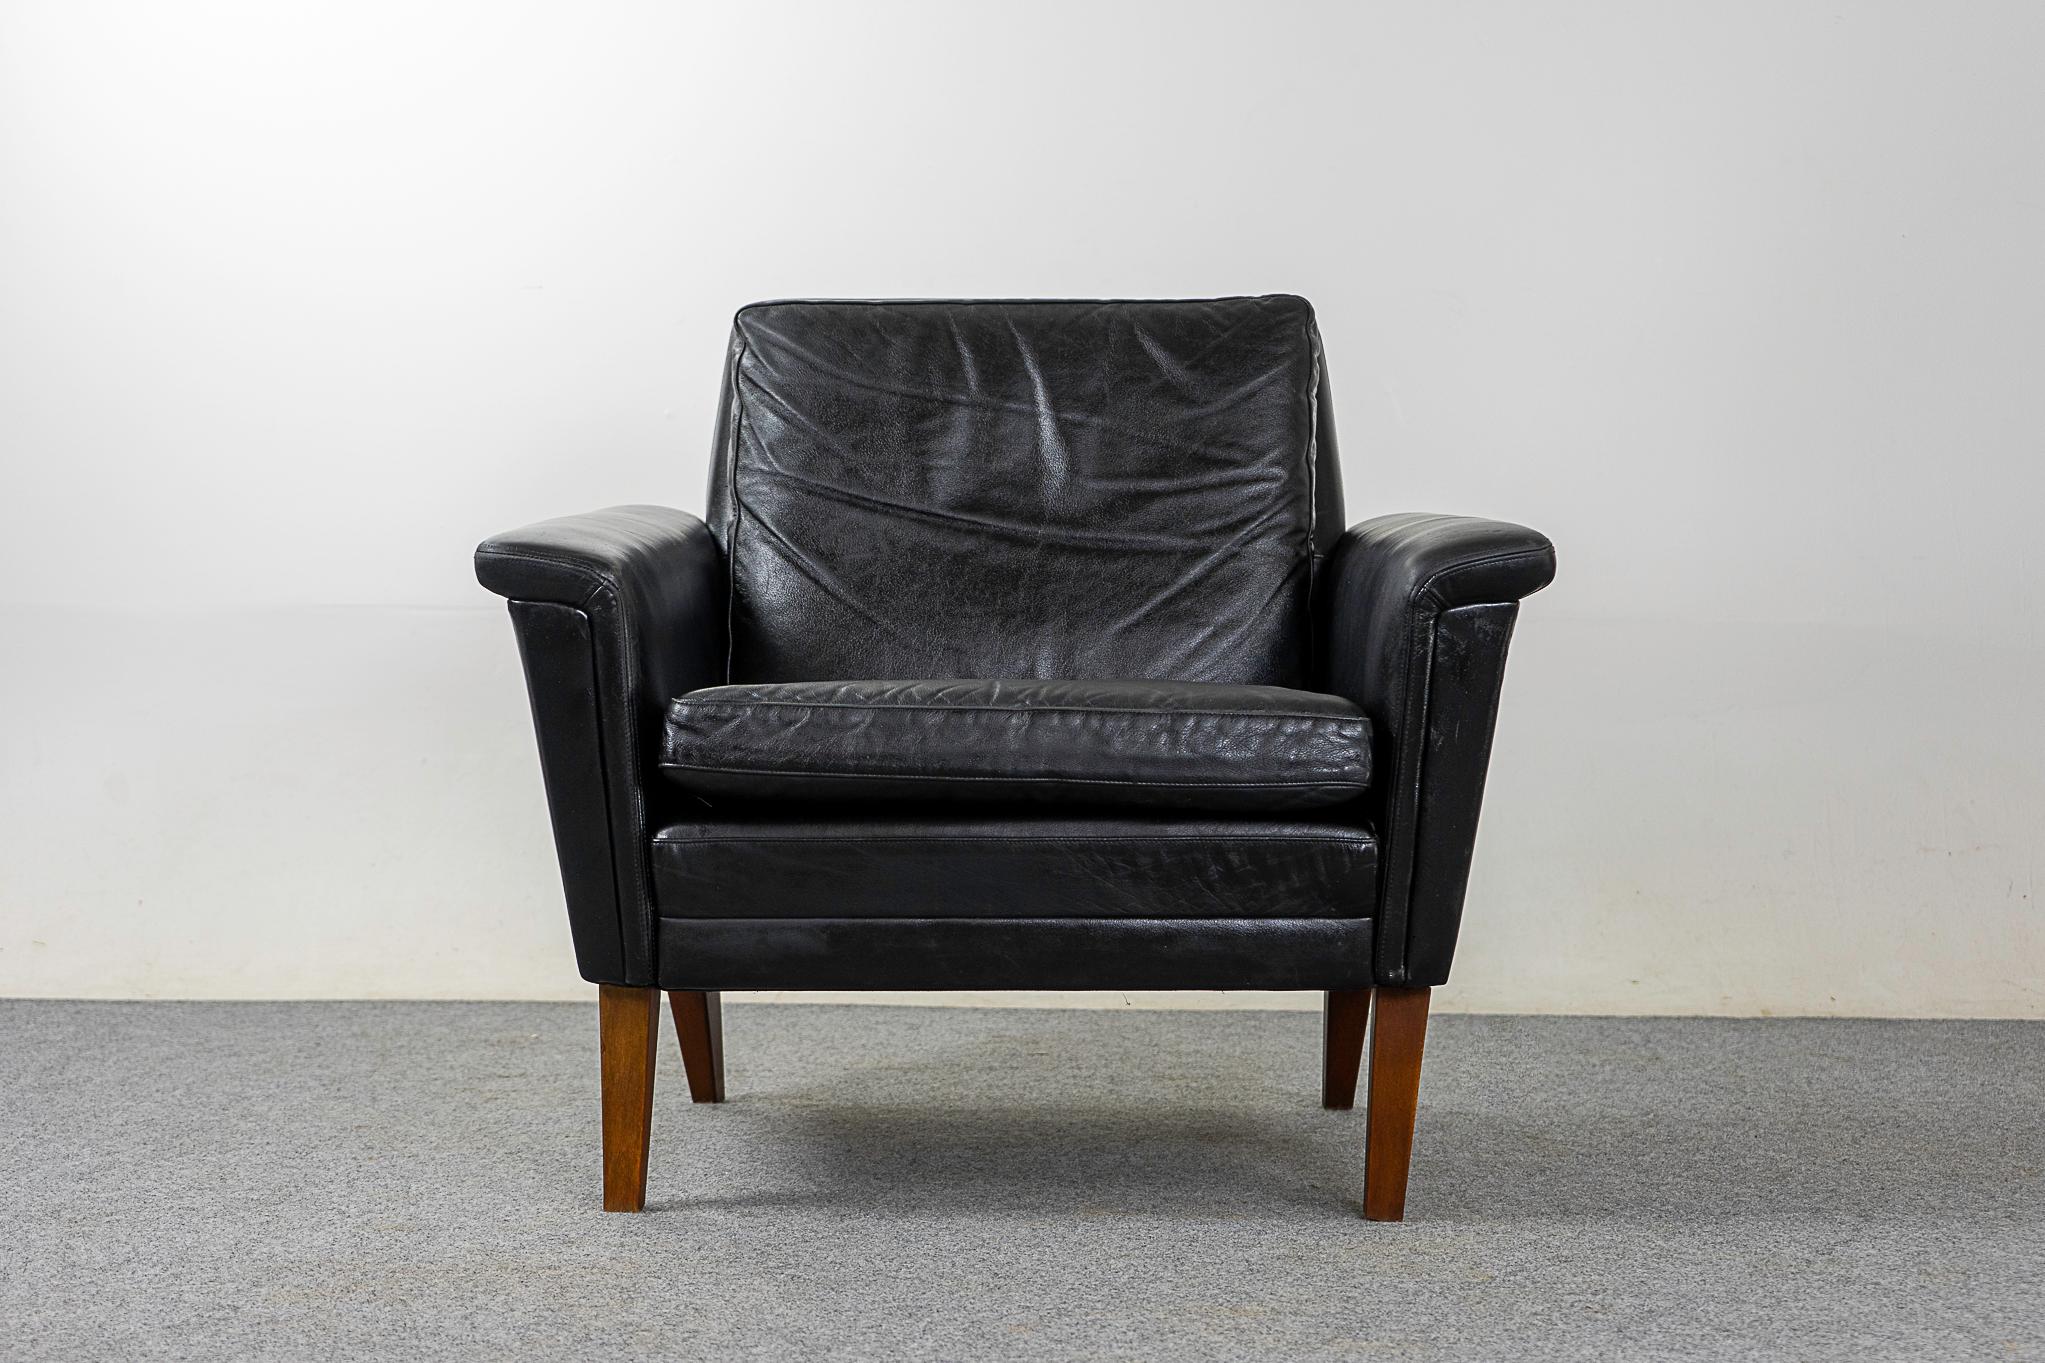 Leather midcentury lounge chair, circa 1960s. Clean lined modern lounge chair with original black leather and solid wood angled feet.